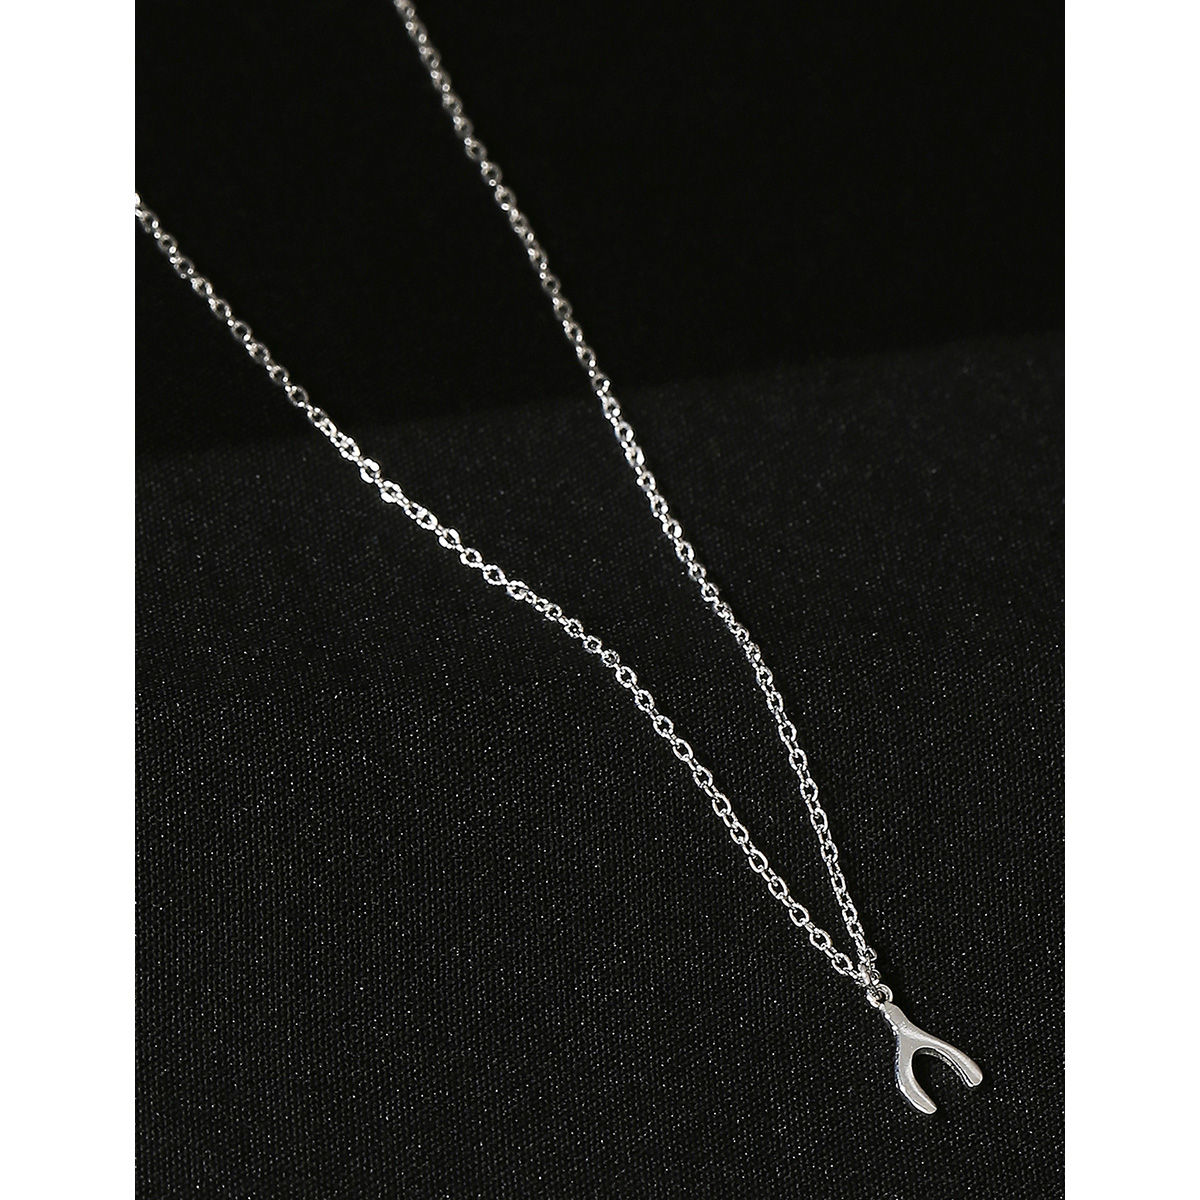 JewelersClub Silver Chain Necklace for Women – .925 Sterling Silver  Wishbone Necklace with Sparkling Genuine Accent White Diamonds – Chic,  Stunning Silver Statement Necklace Gifts by JewelersClub - Walmart.com